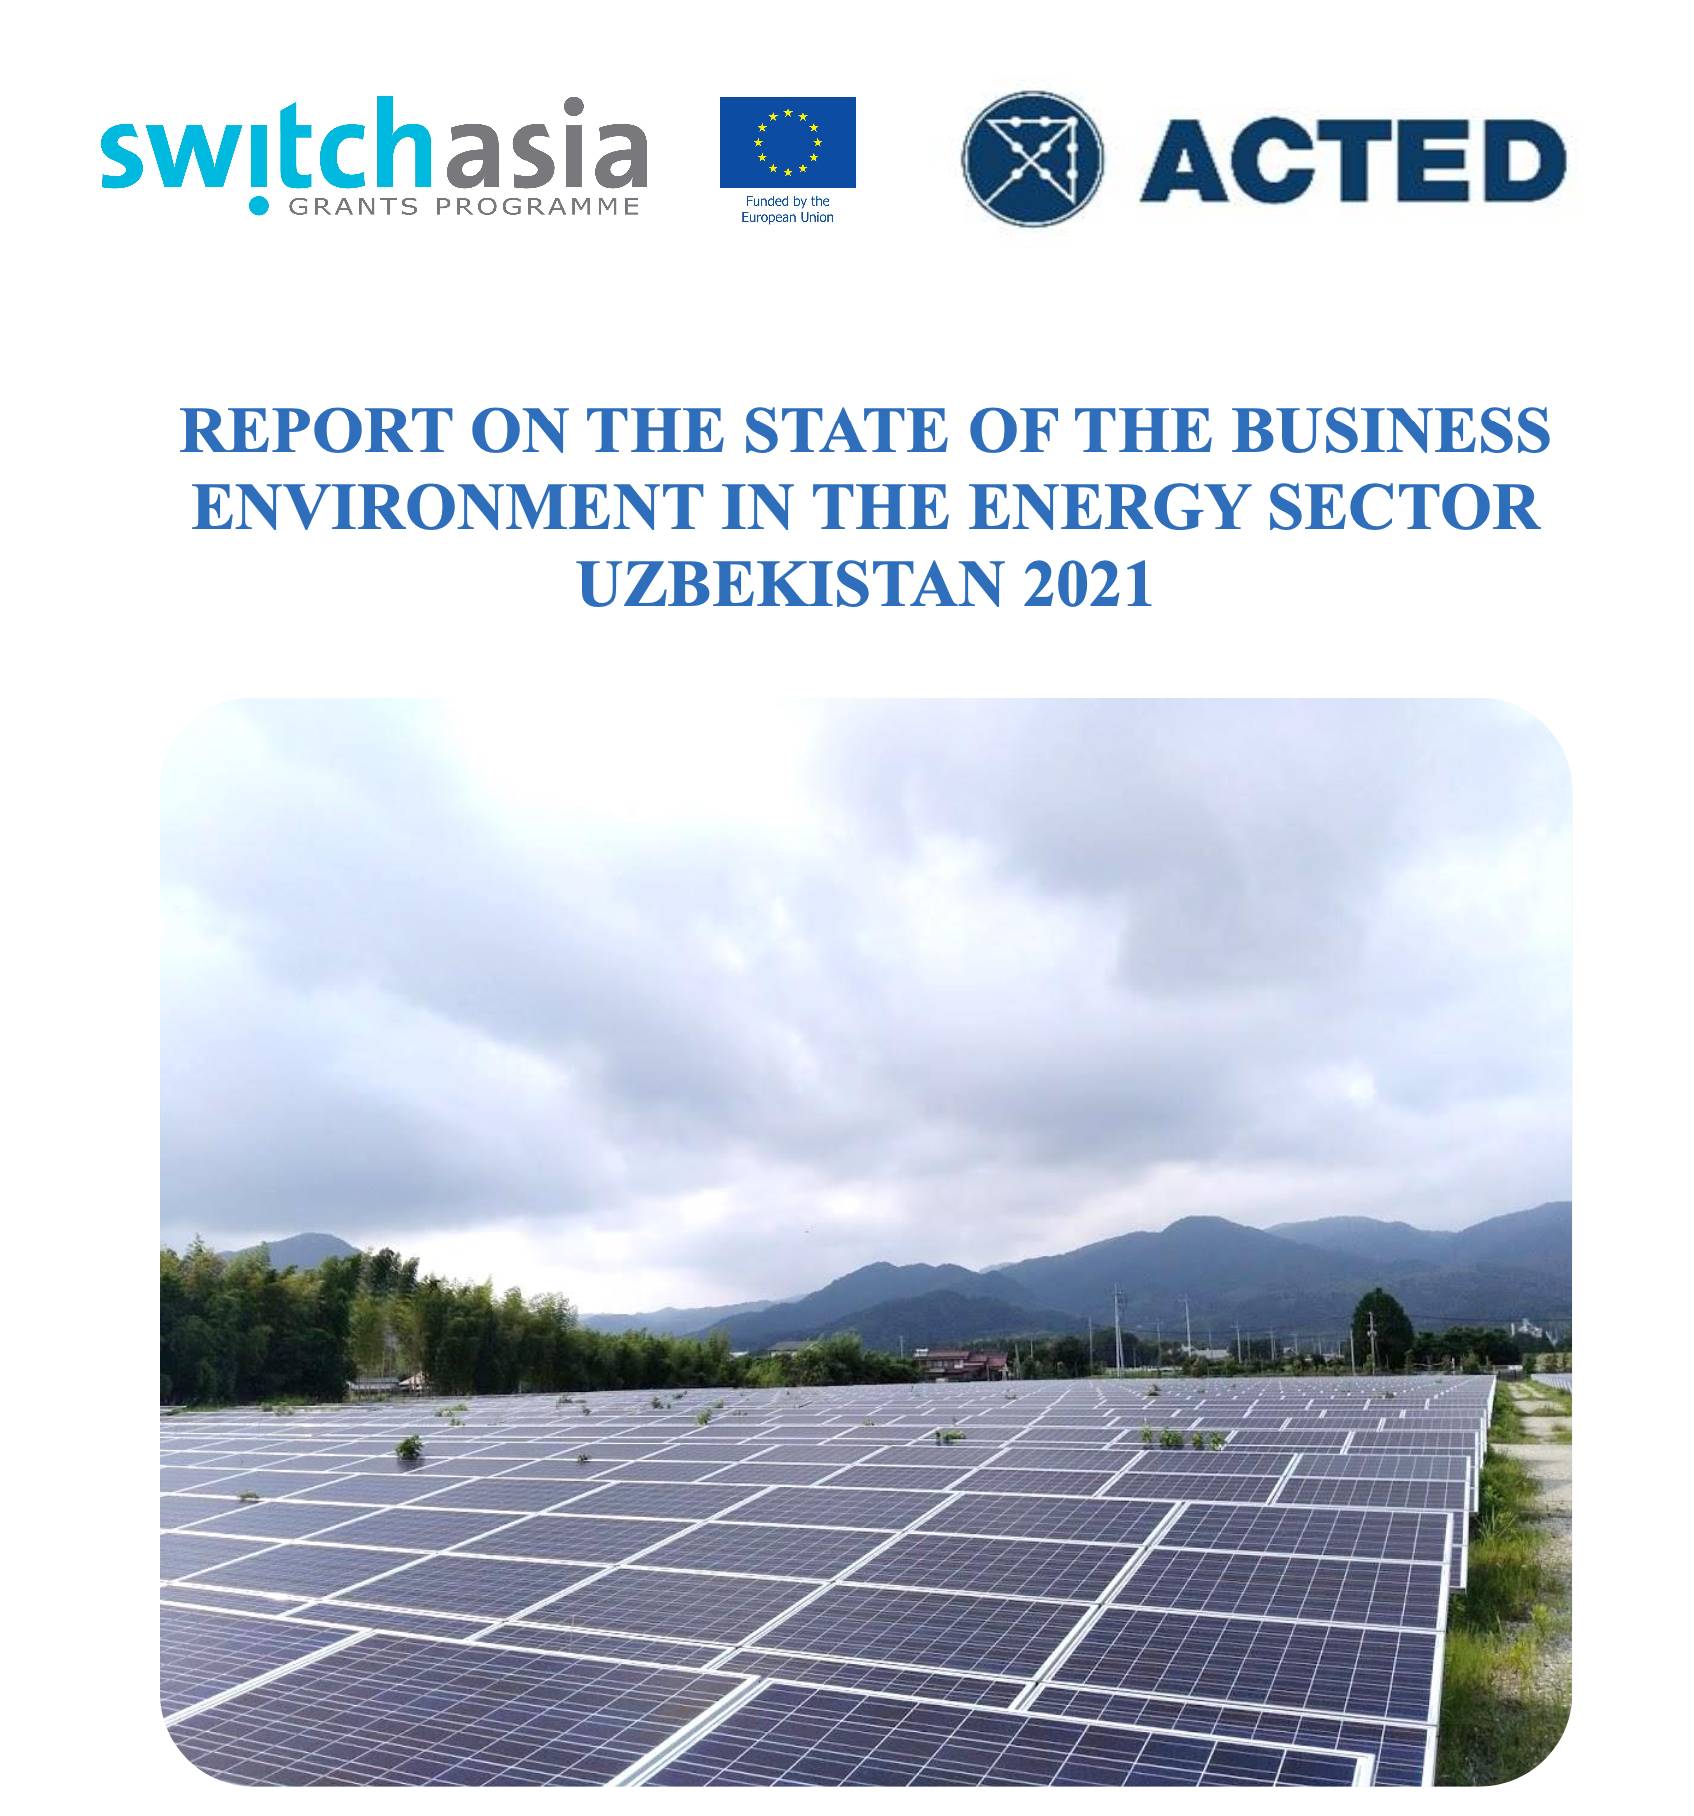 Report on the state of the business environment in the energy sector of Uzbekistan